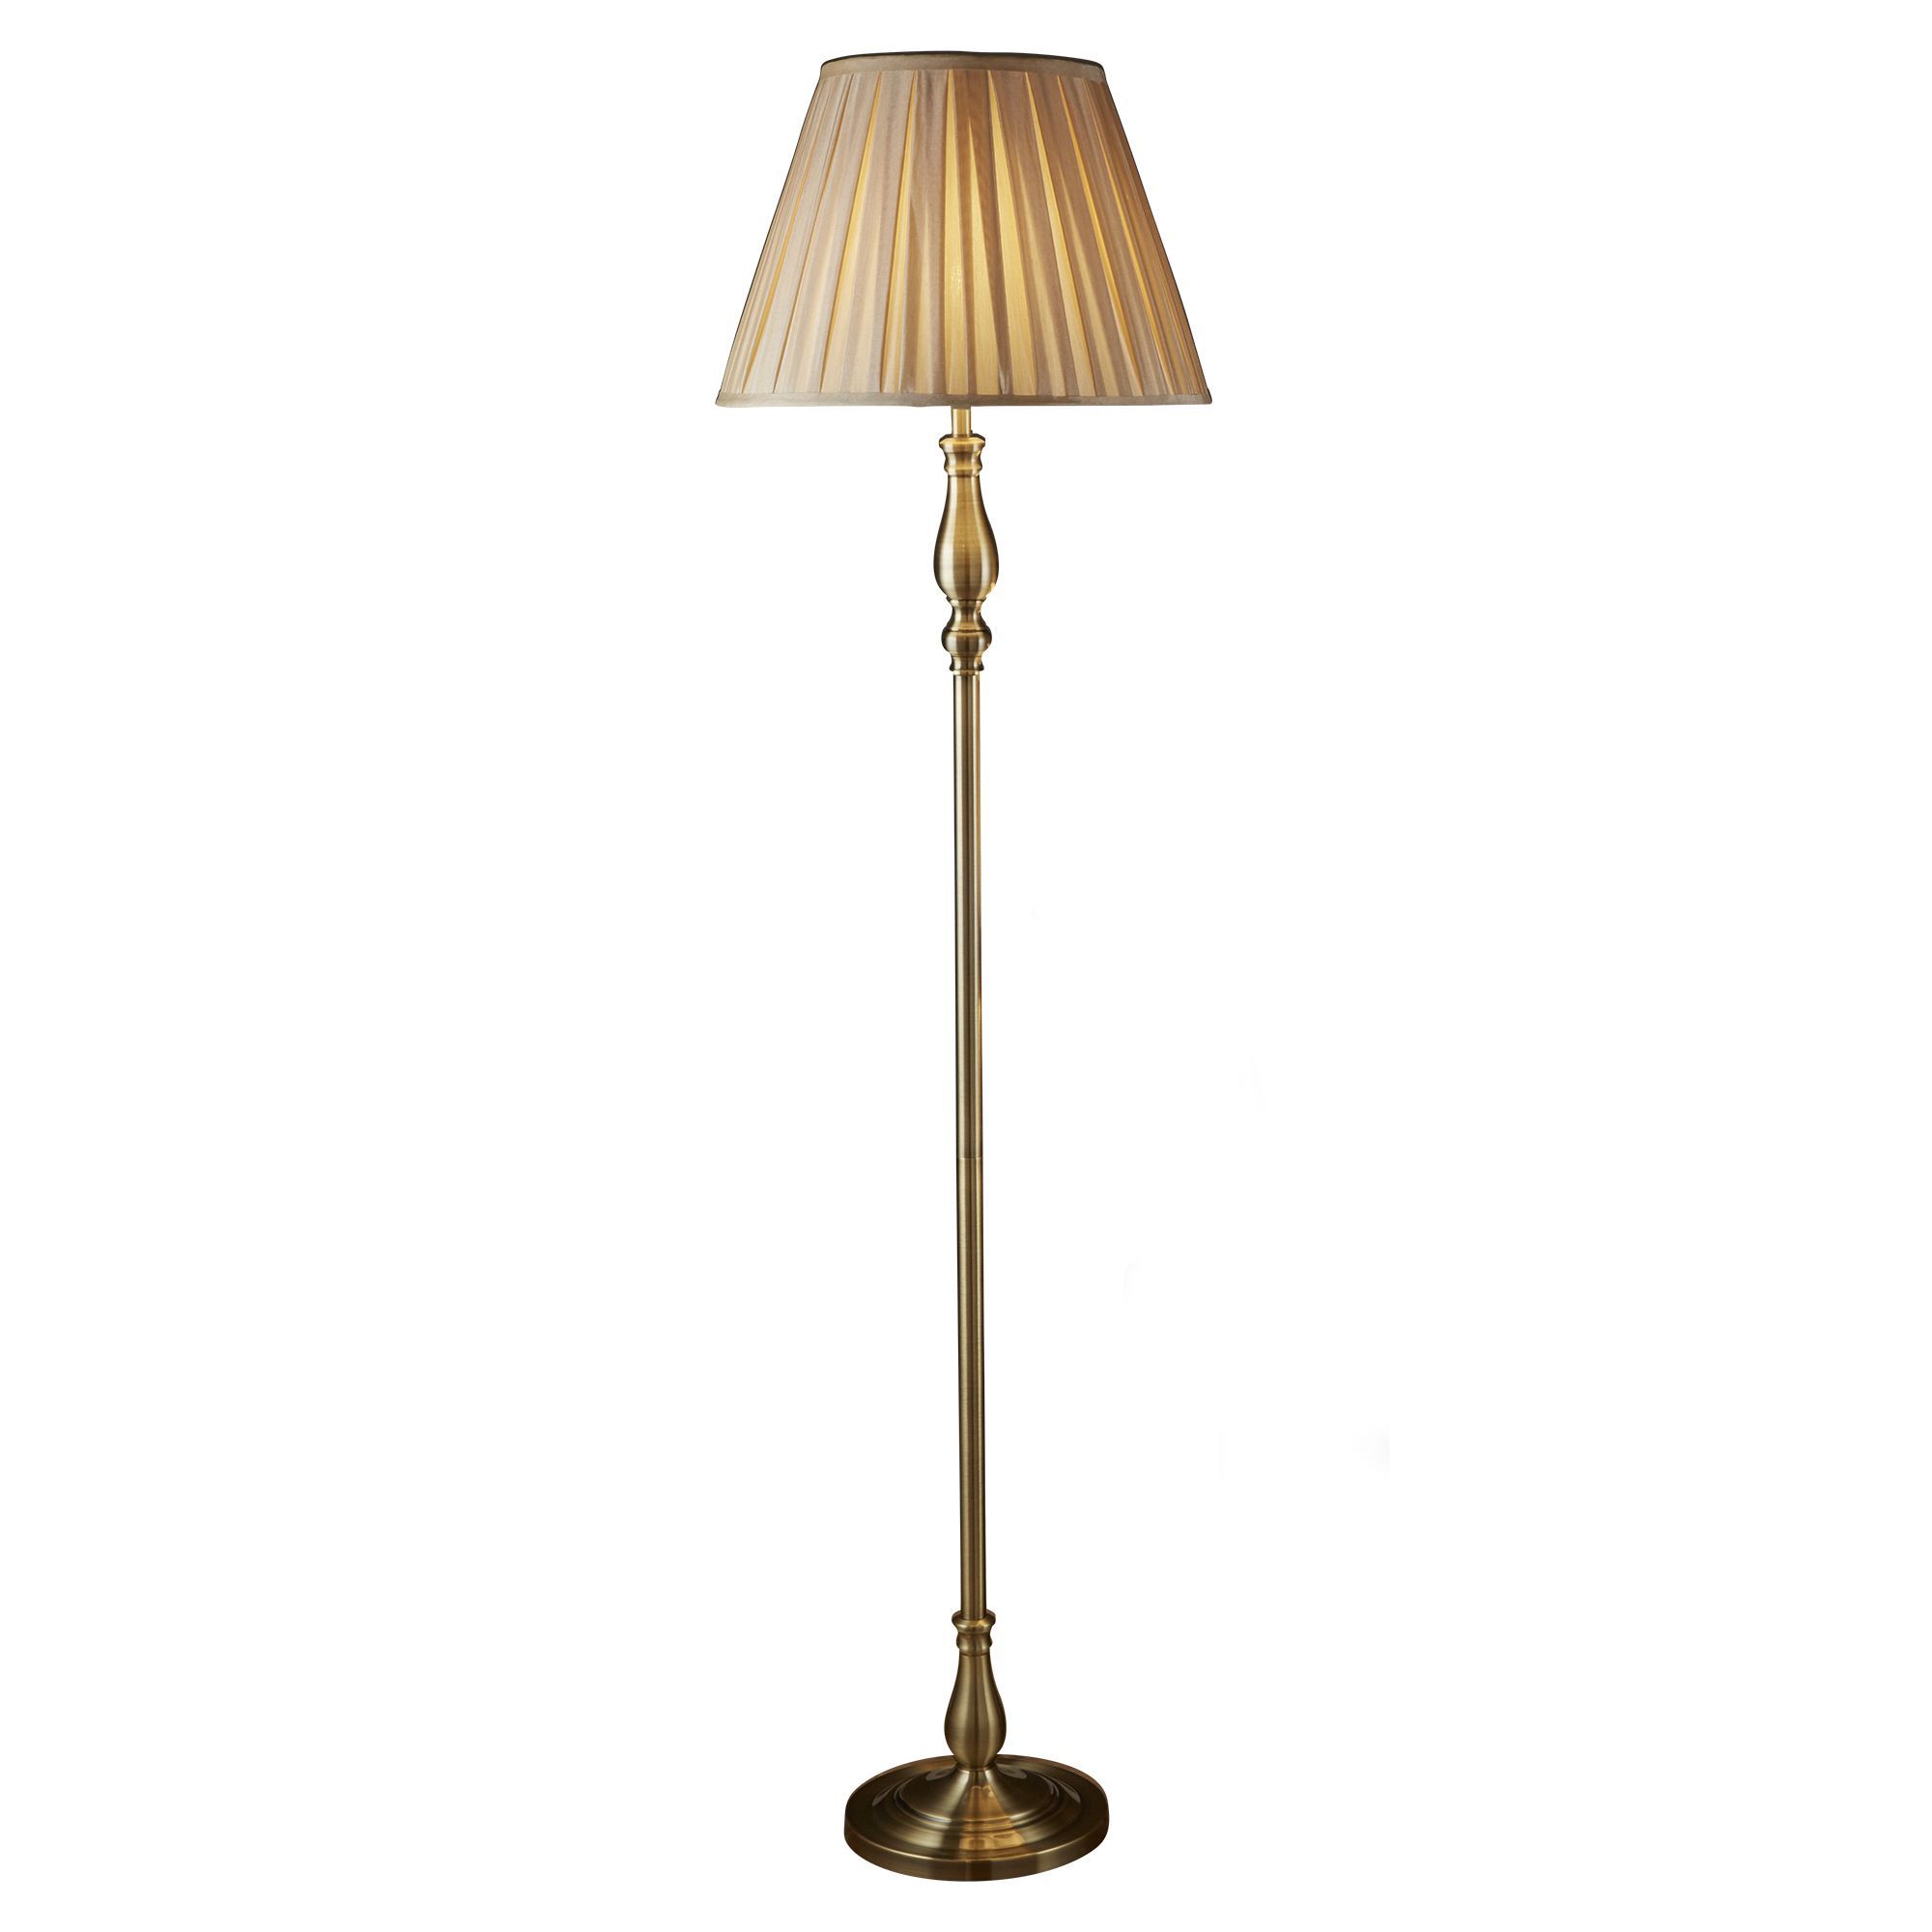 Antique Brass Floor Lamp With Pleated Fabric Shade | 5029ab Throughout Antique Brass Floor Lamps (Photo 14 of 15)